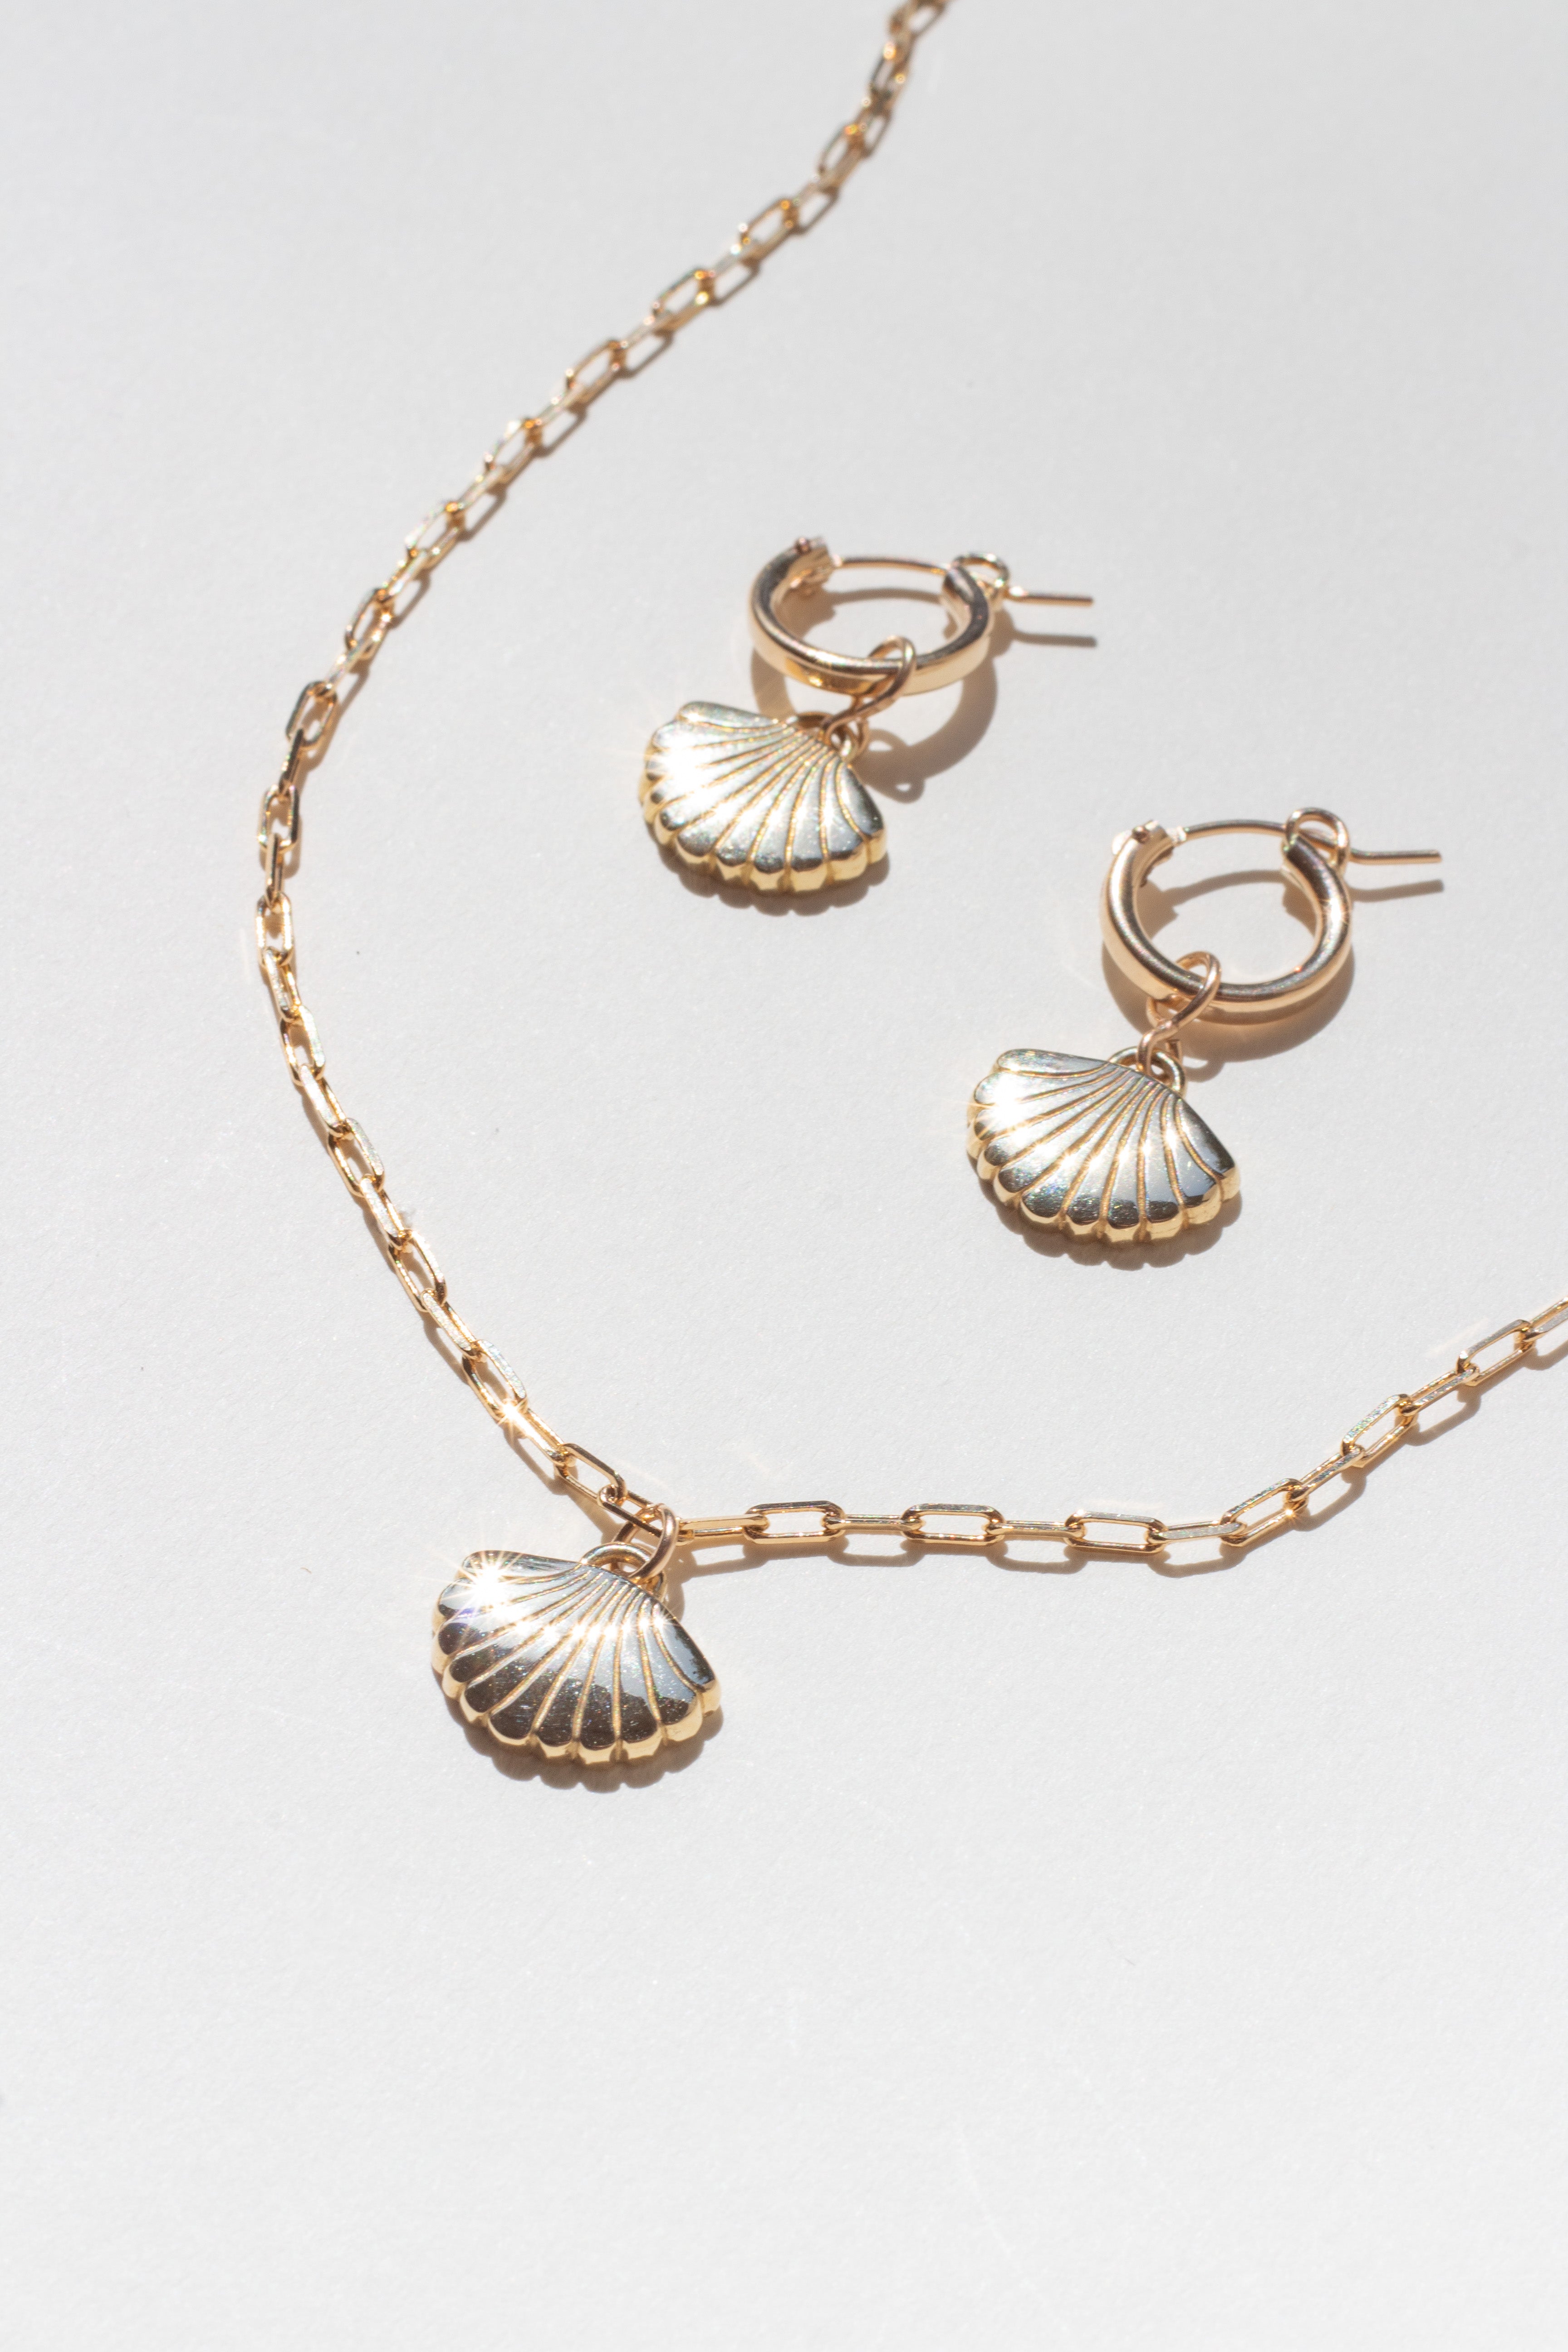 The Coquille Charm Earrings